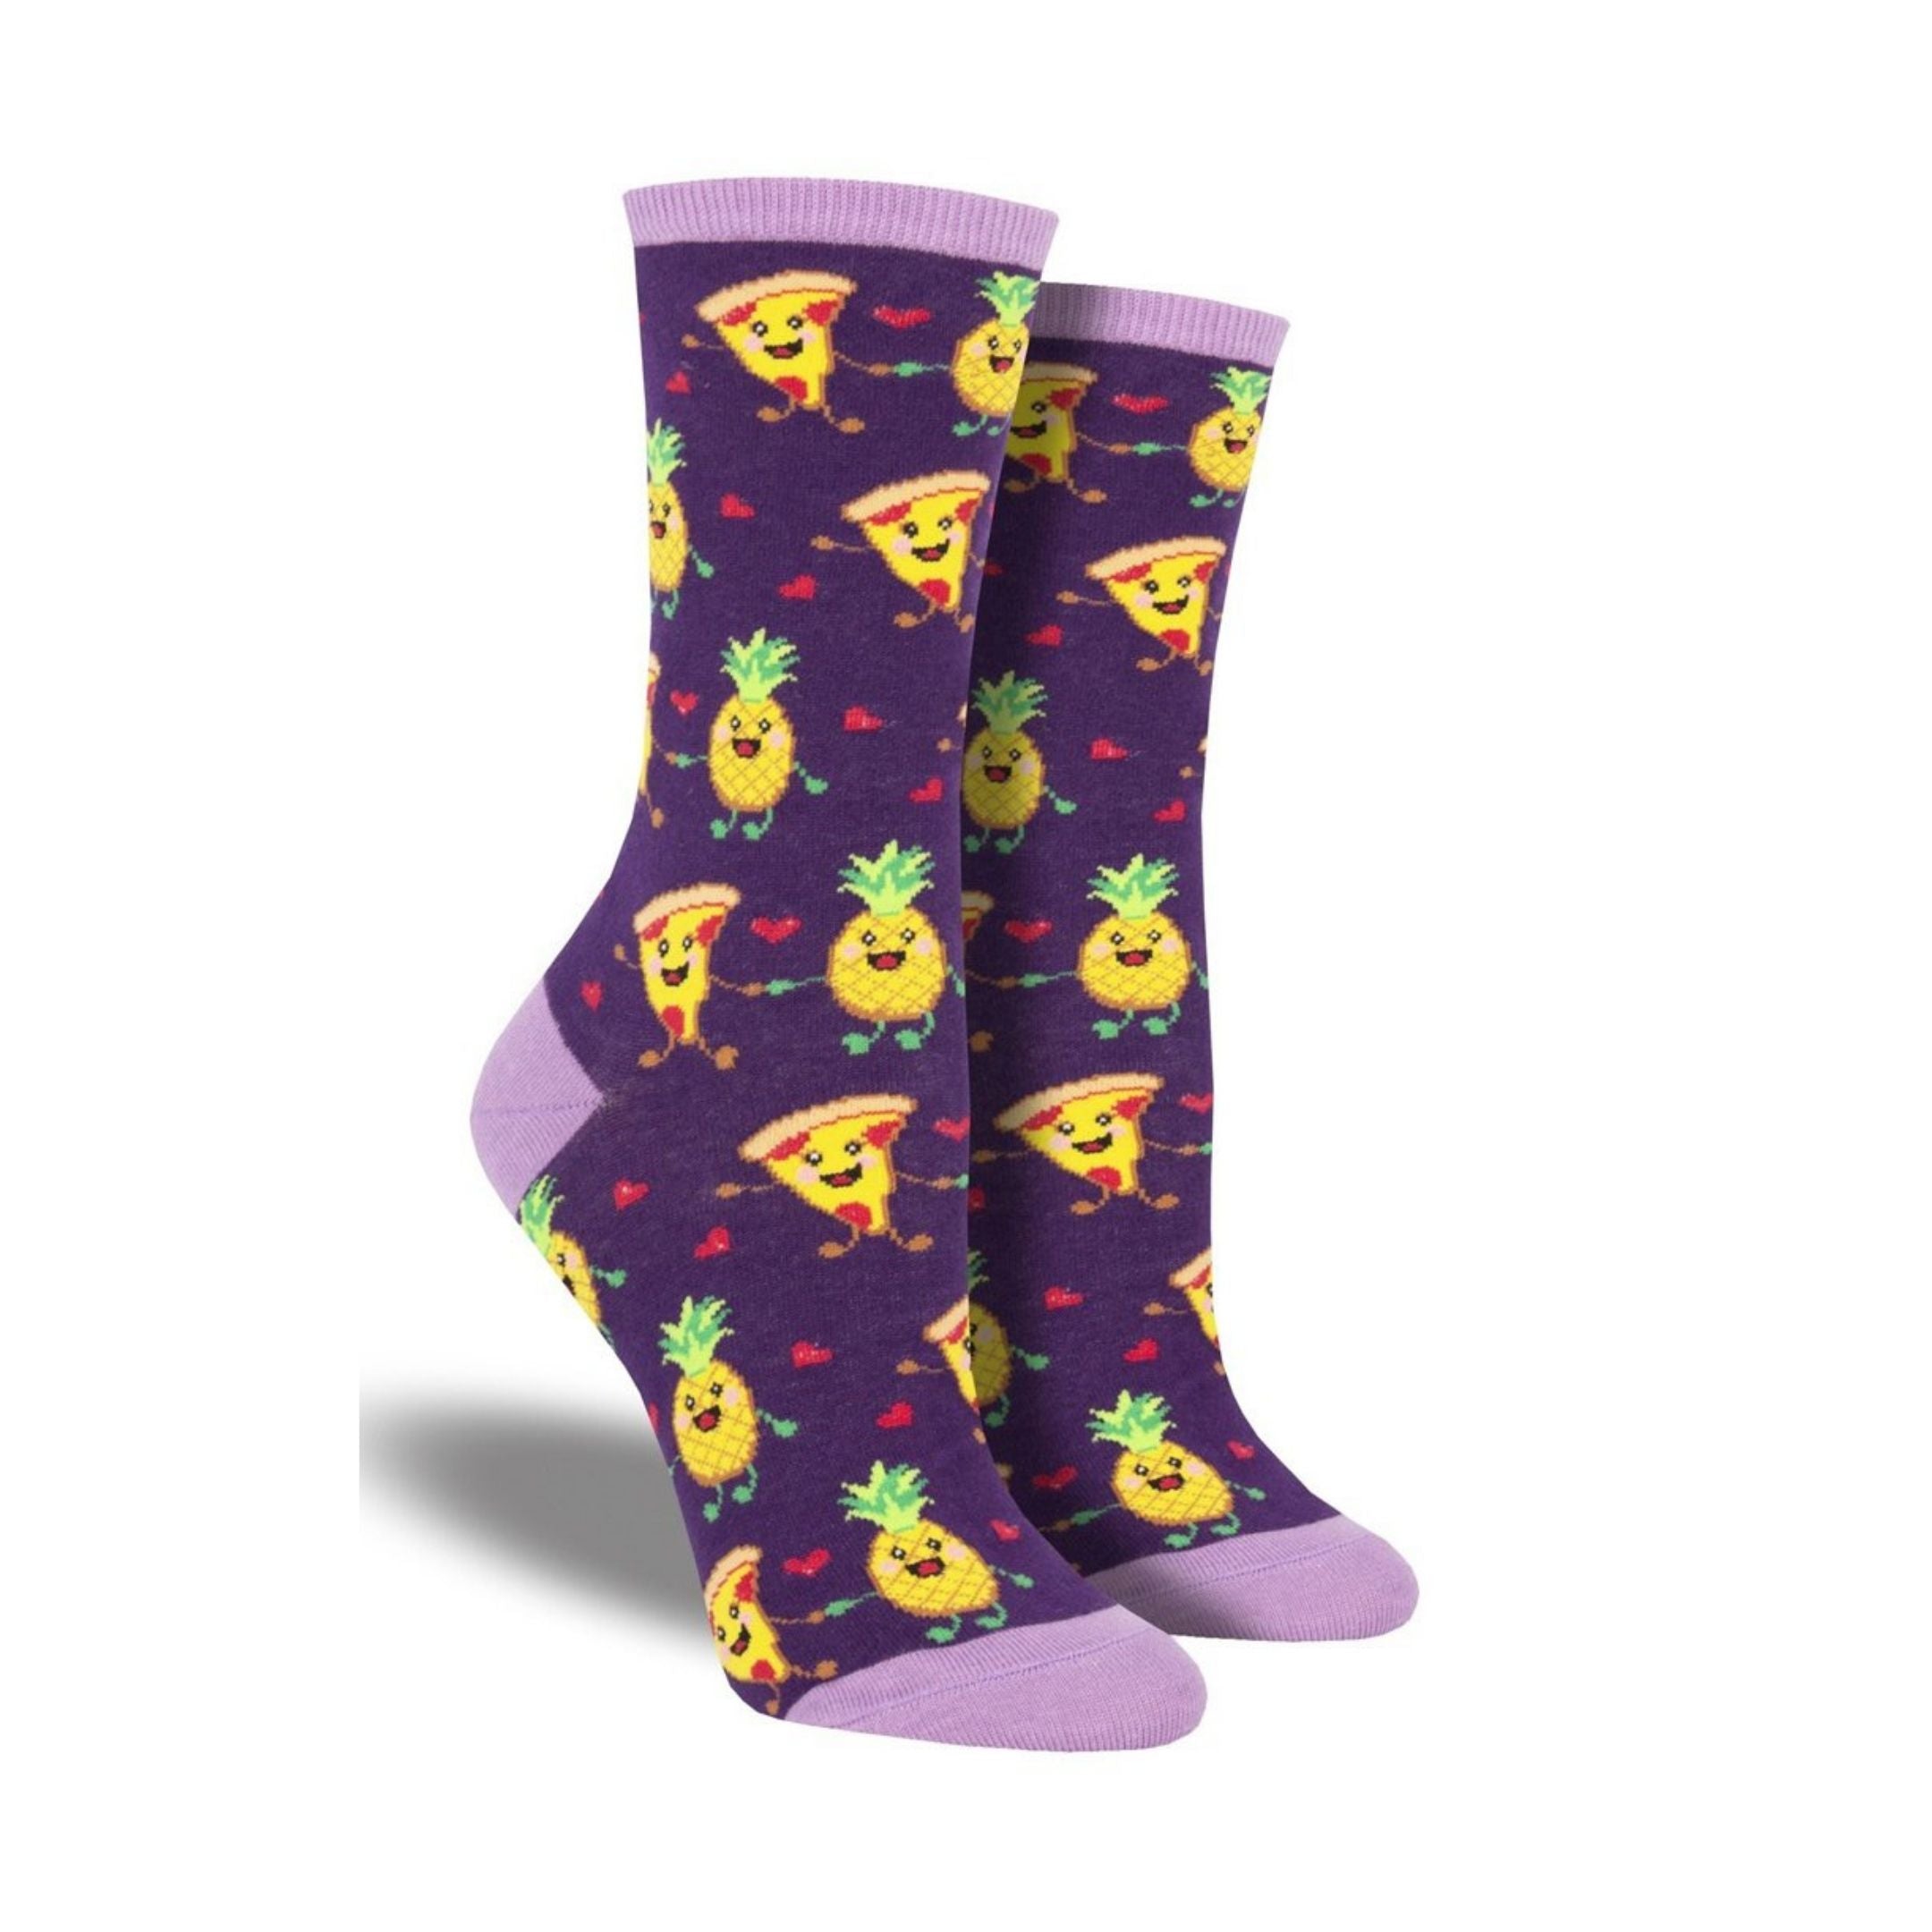 Purple Socks with Pizza and pineapples holding hands